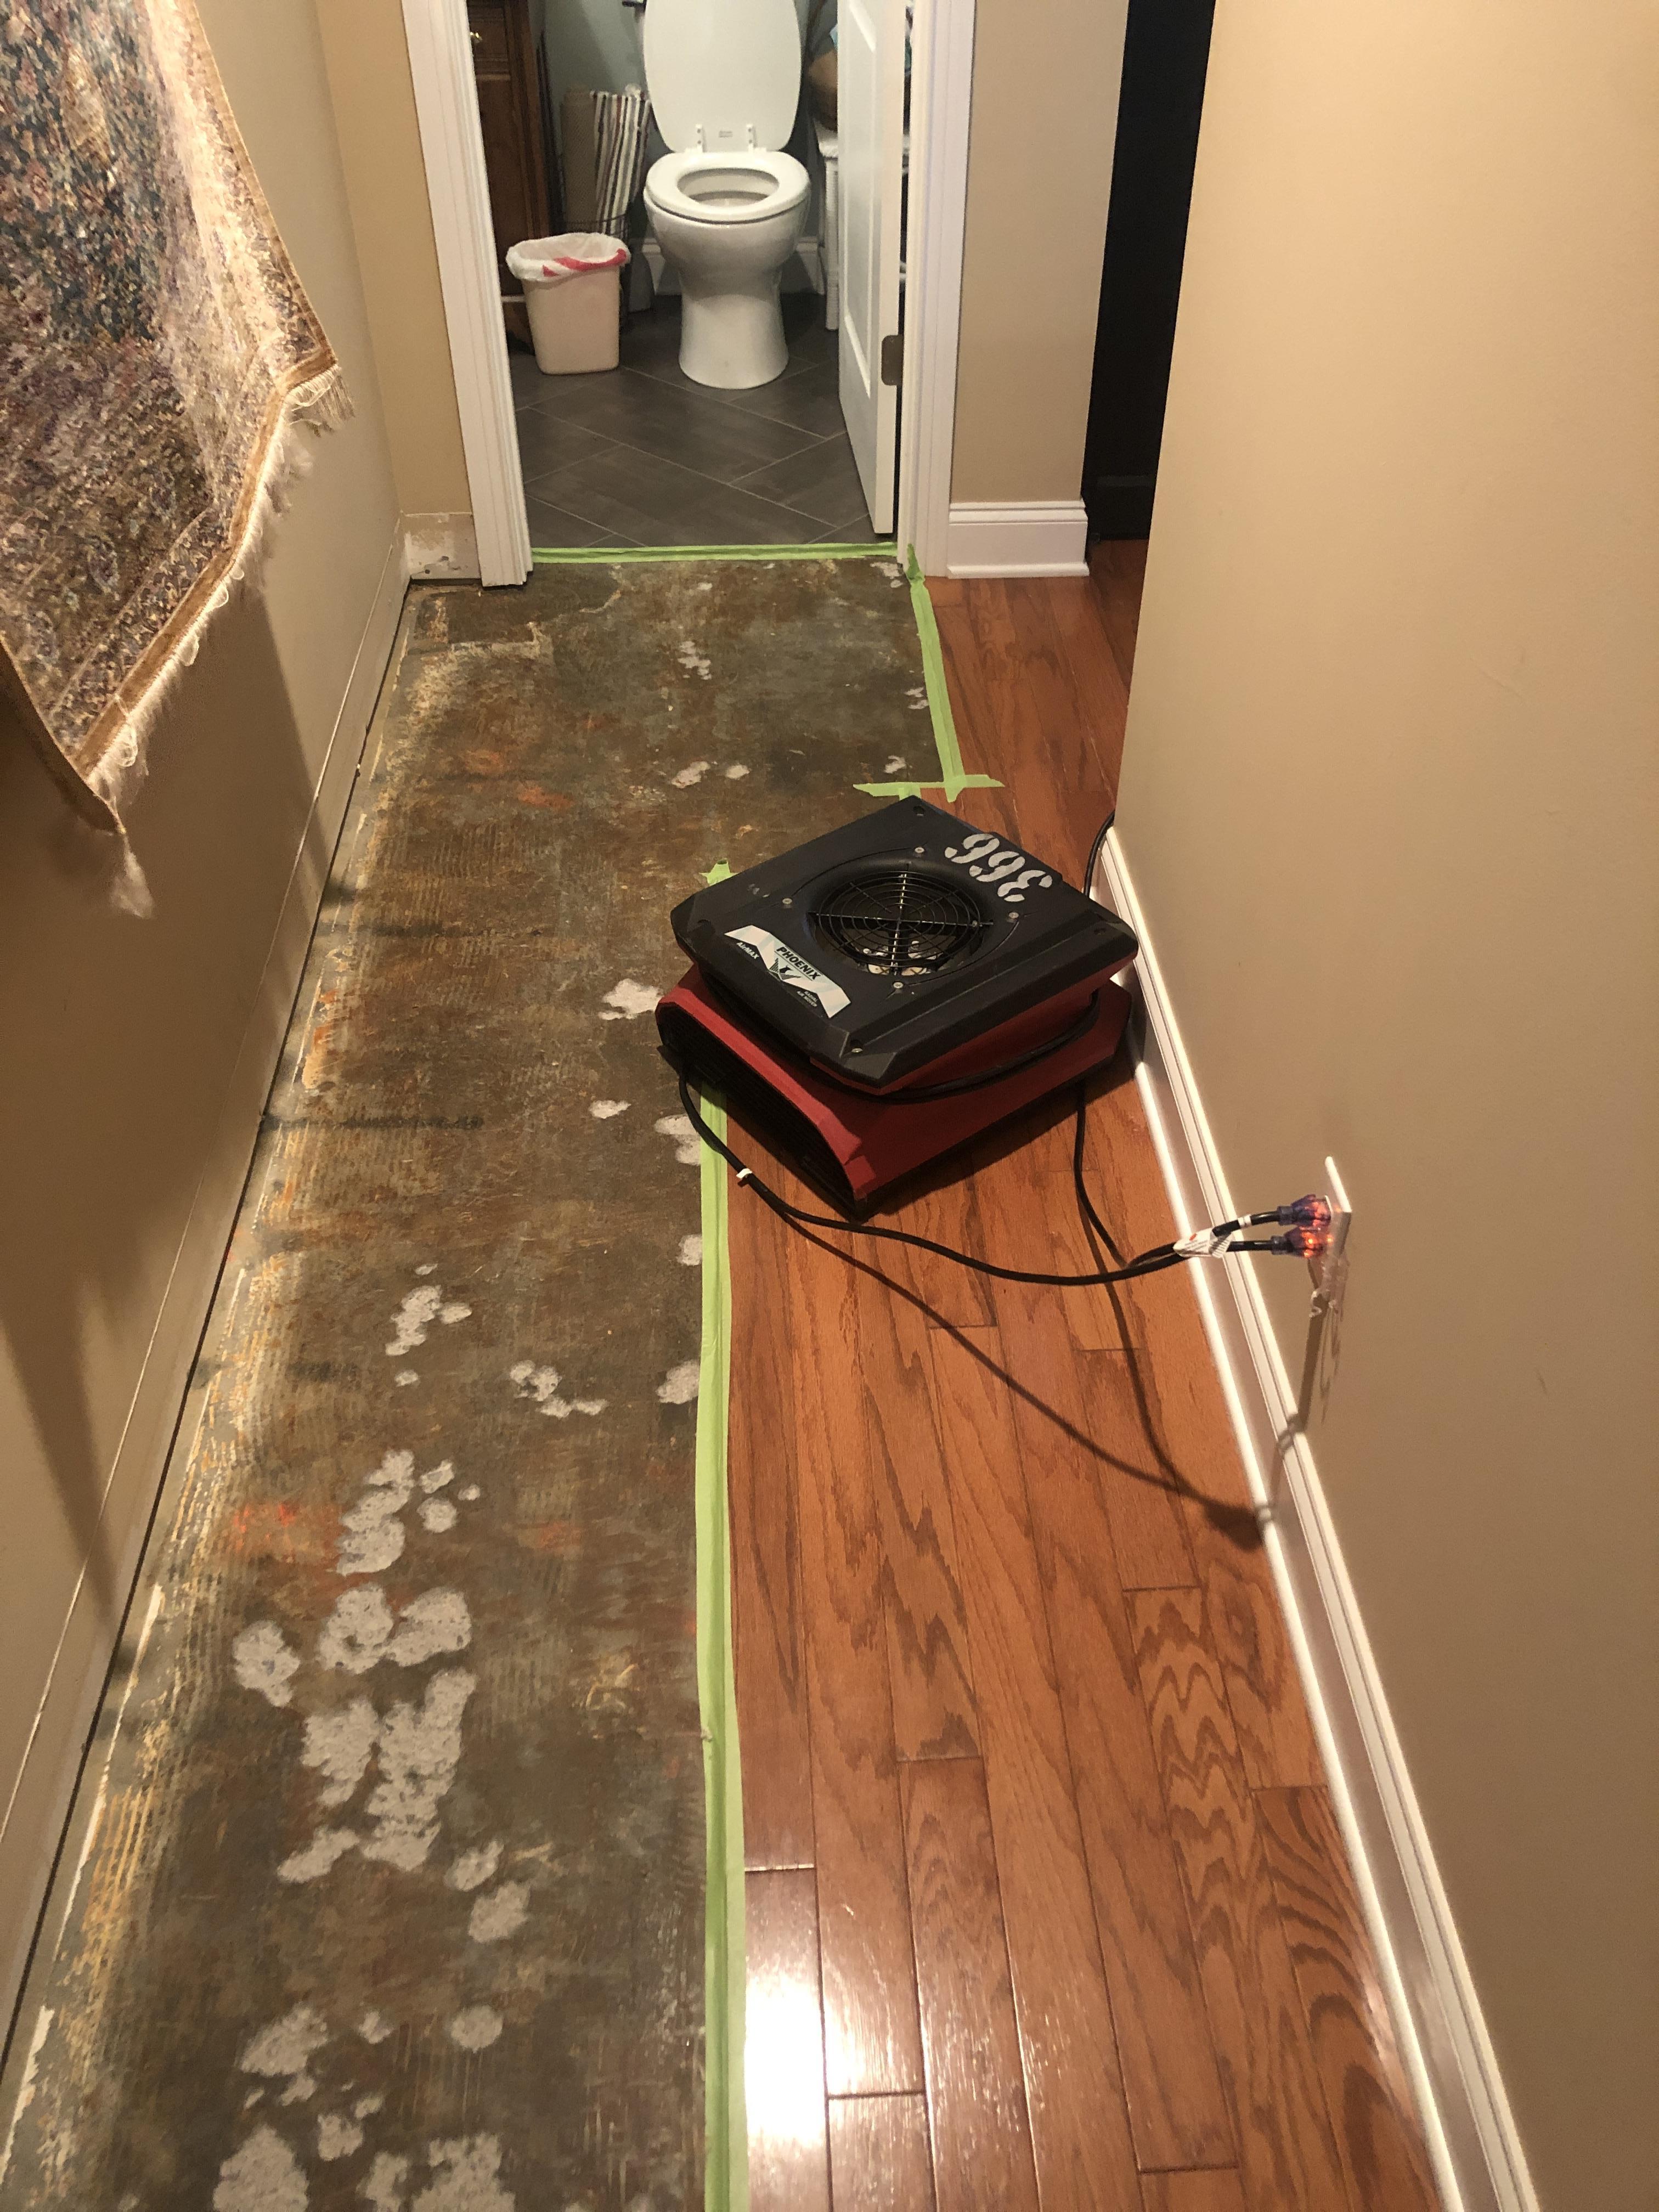 Drying out the flooring to prevent mold